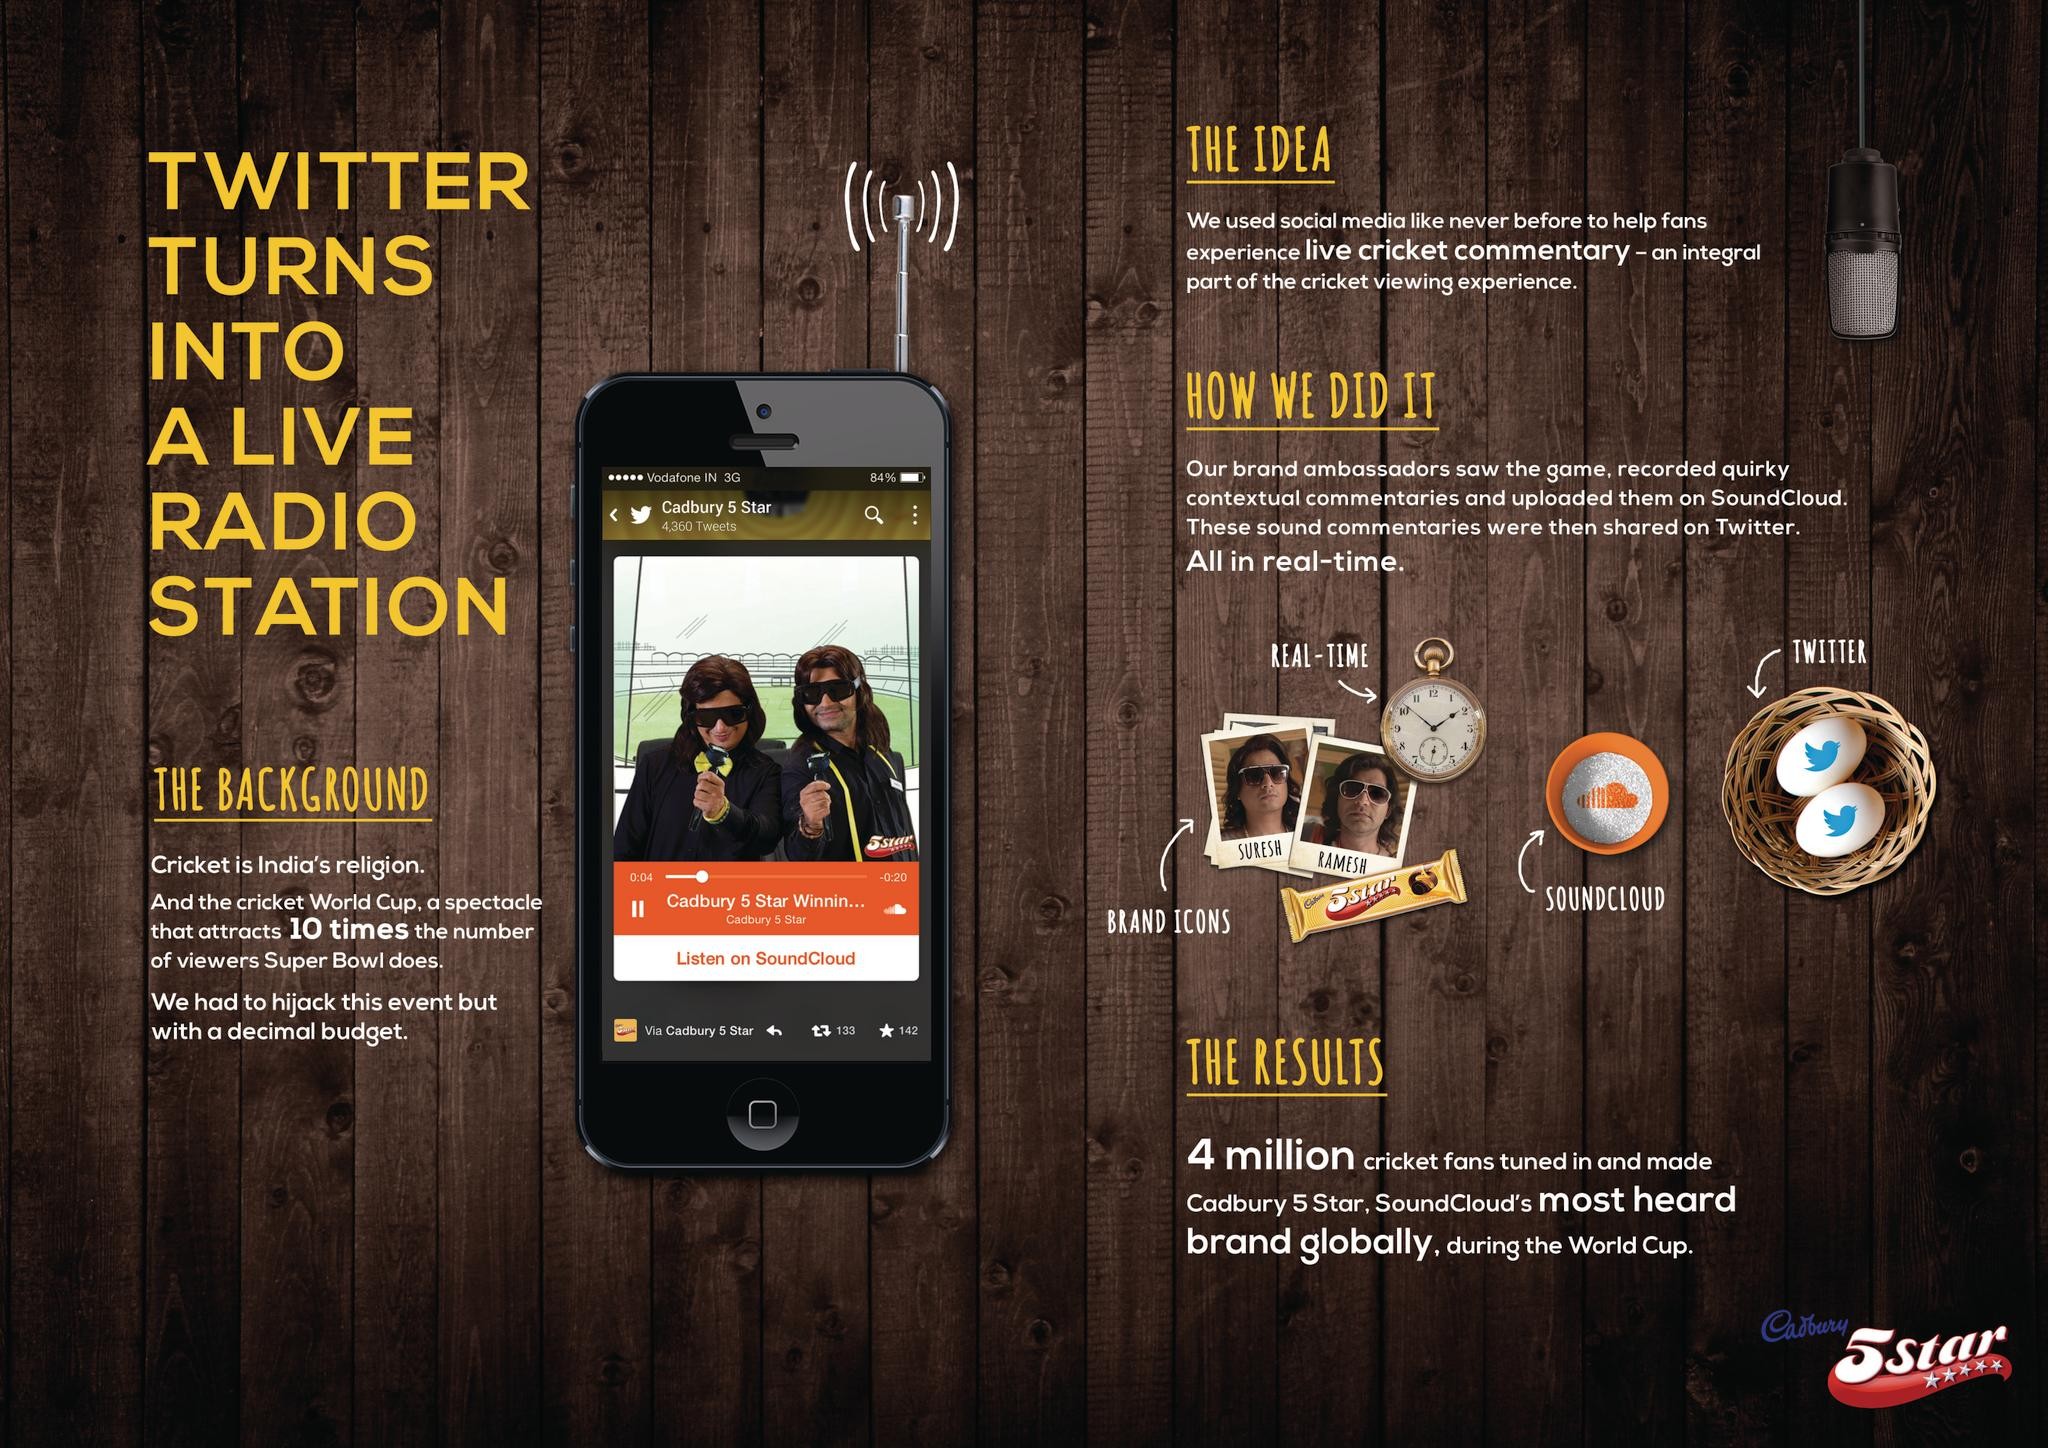 TURNING TWITTER INTO A LIVE RADIO STATION